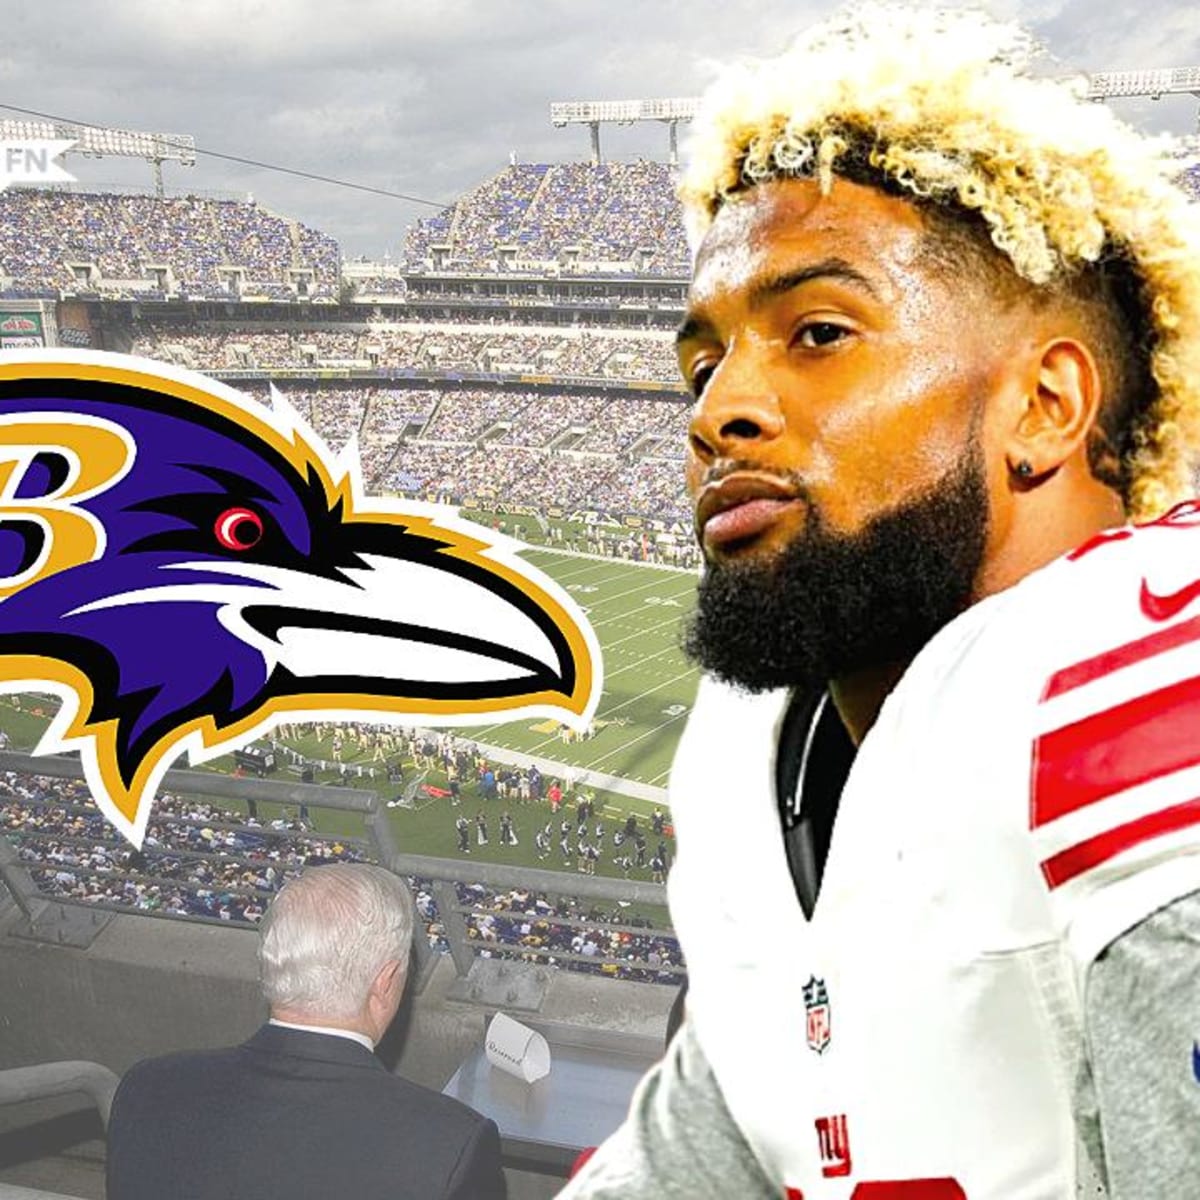 Baltimore Ravens agree to 1-year deal with Odell Beckham Jr.